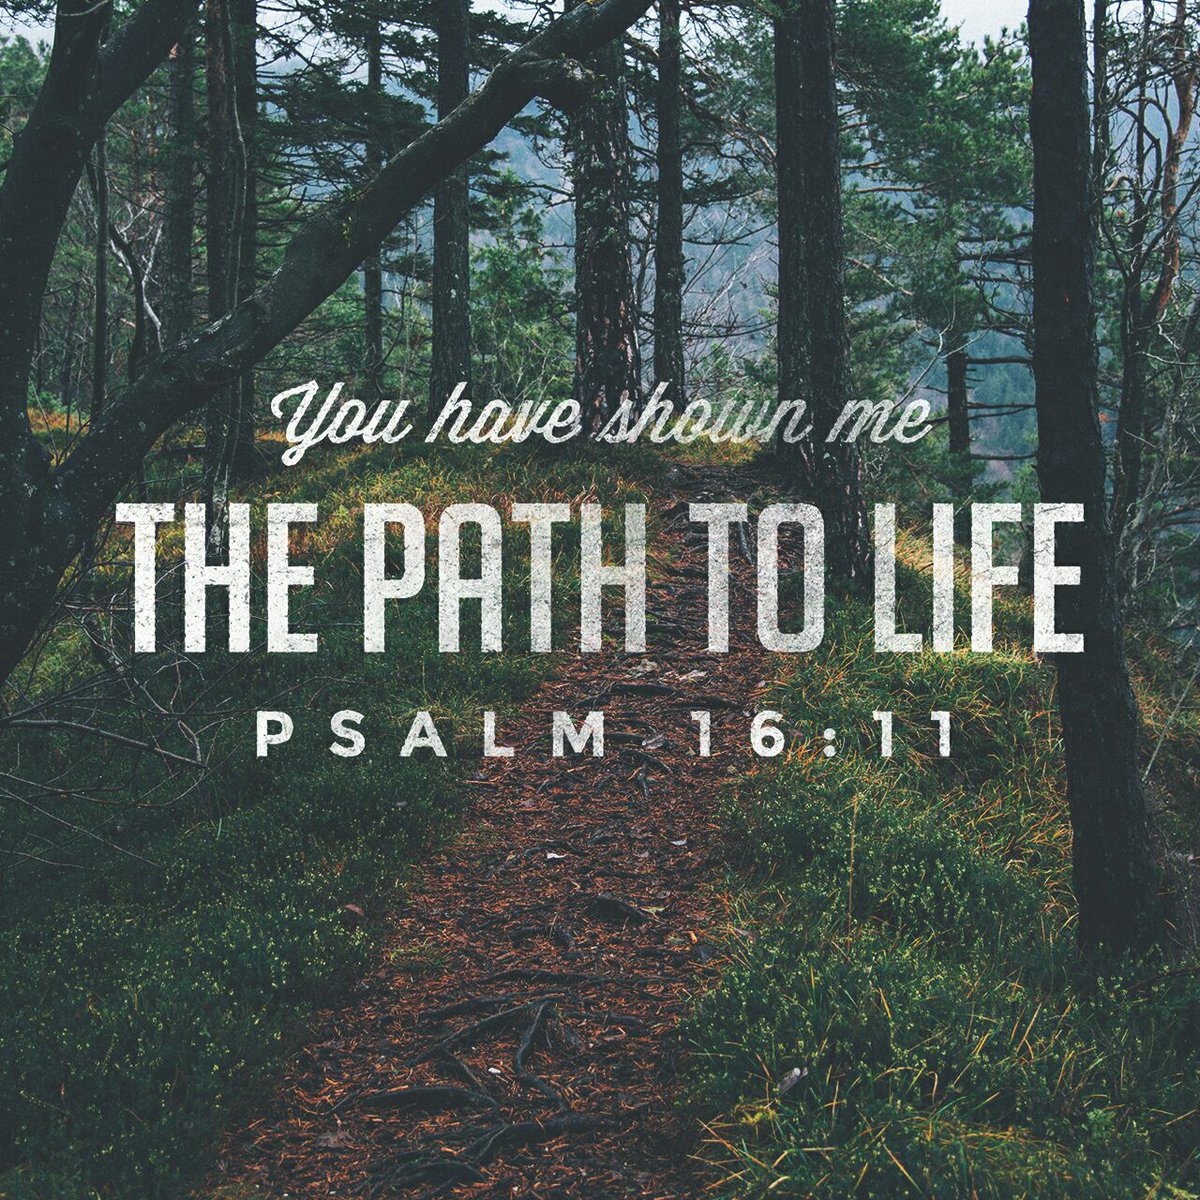 Testimony 4 Tuesday (9/6):
Jesus is qualified to show us the path of life because He is life. #HeIsLife. #16Ps11.